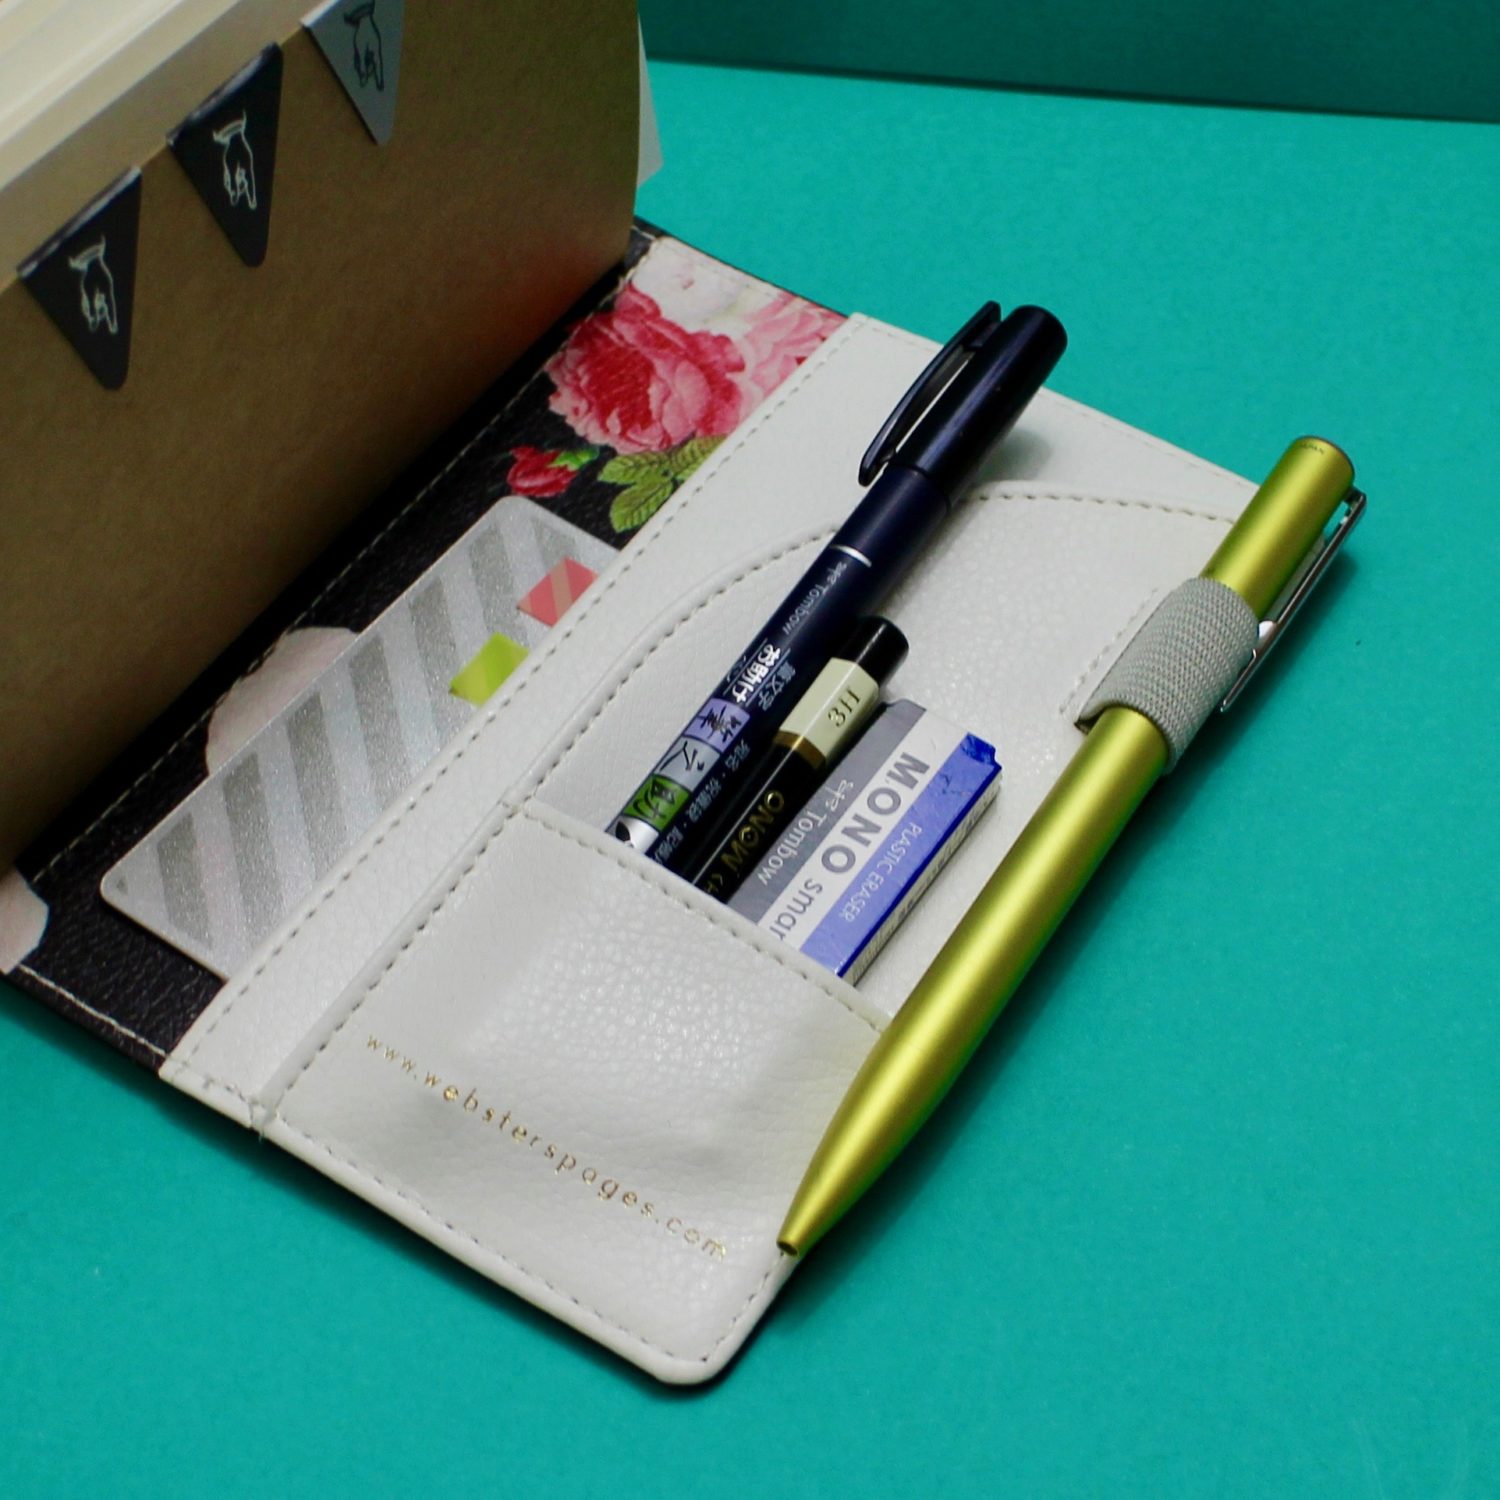 @mariebcreates #tombow #travelnotebook Tombow products in the pocket of the notebook